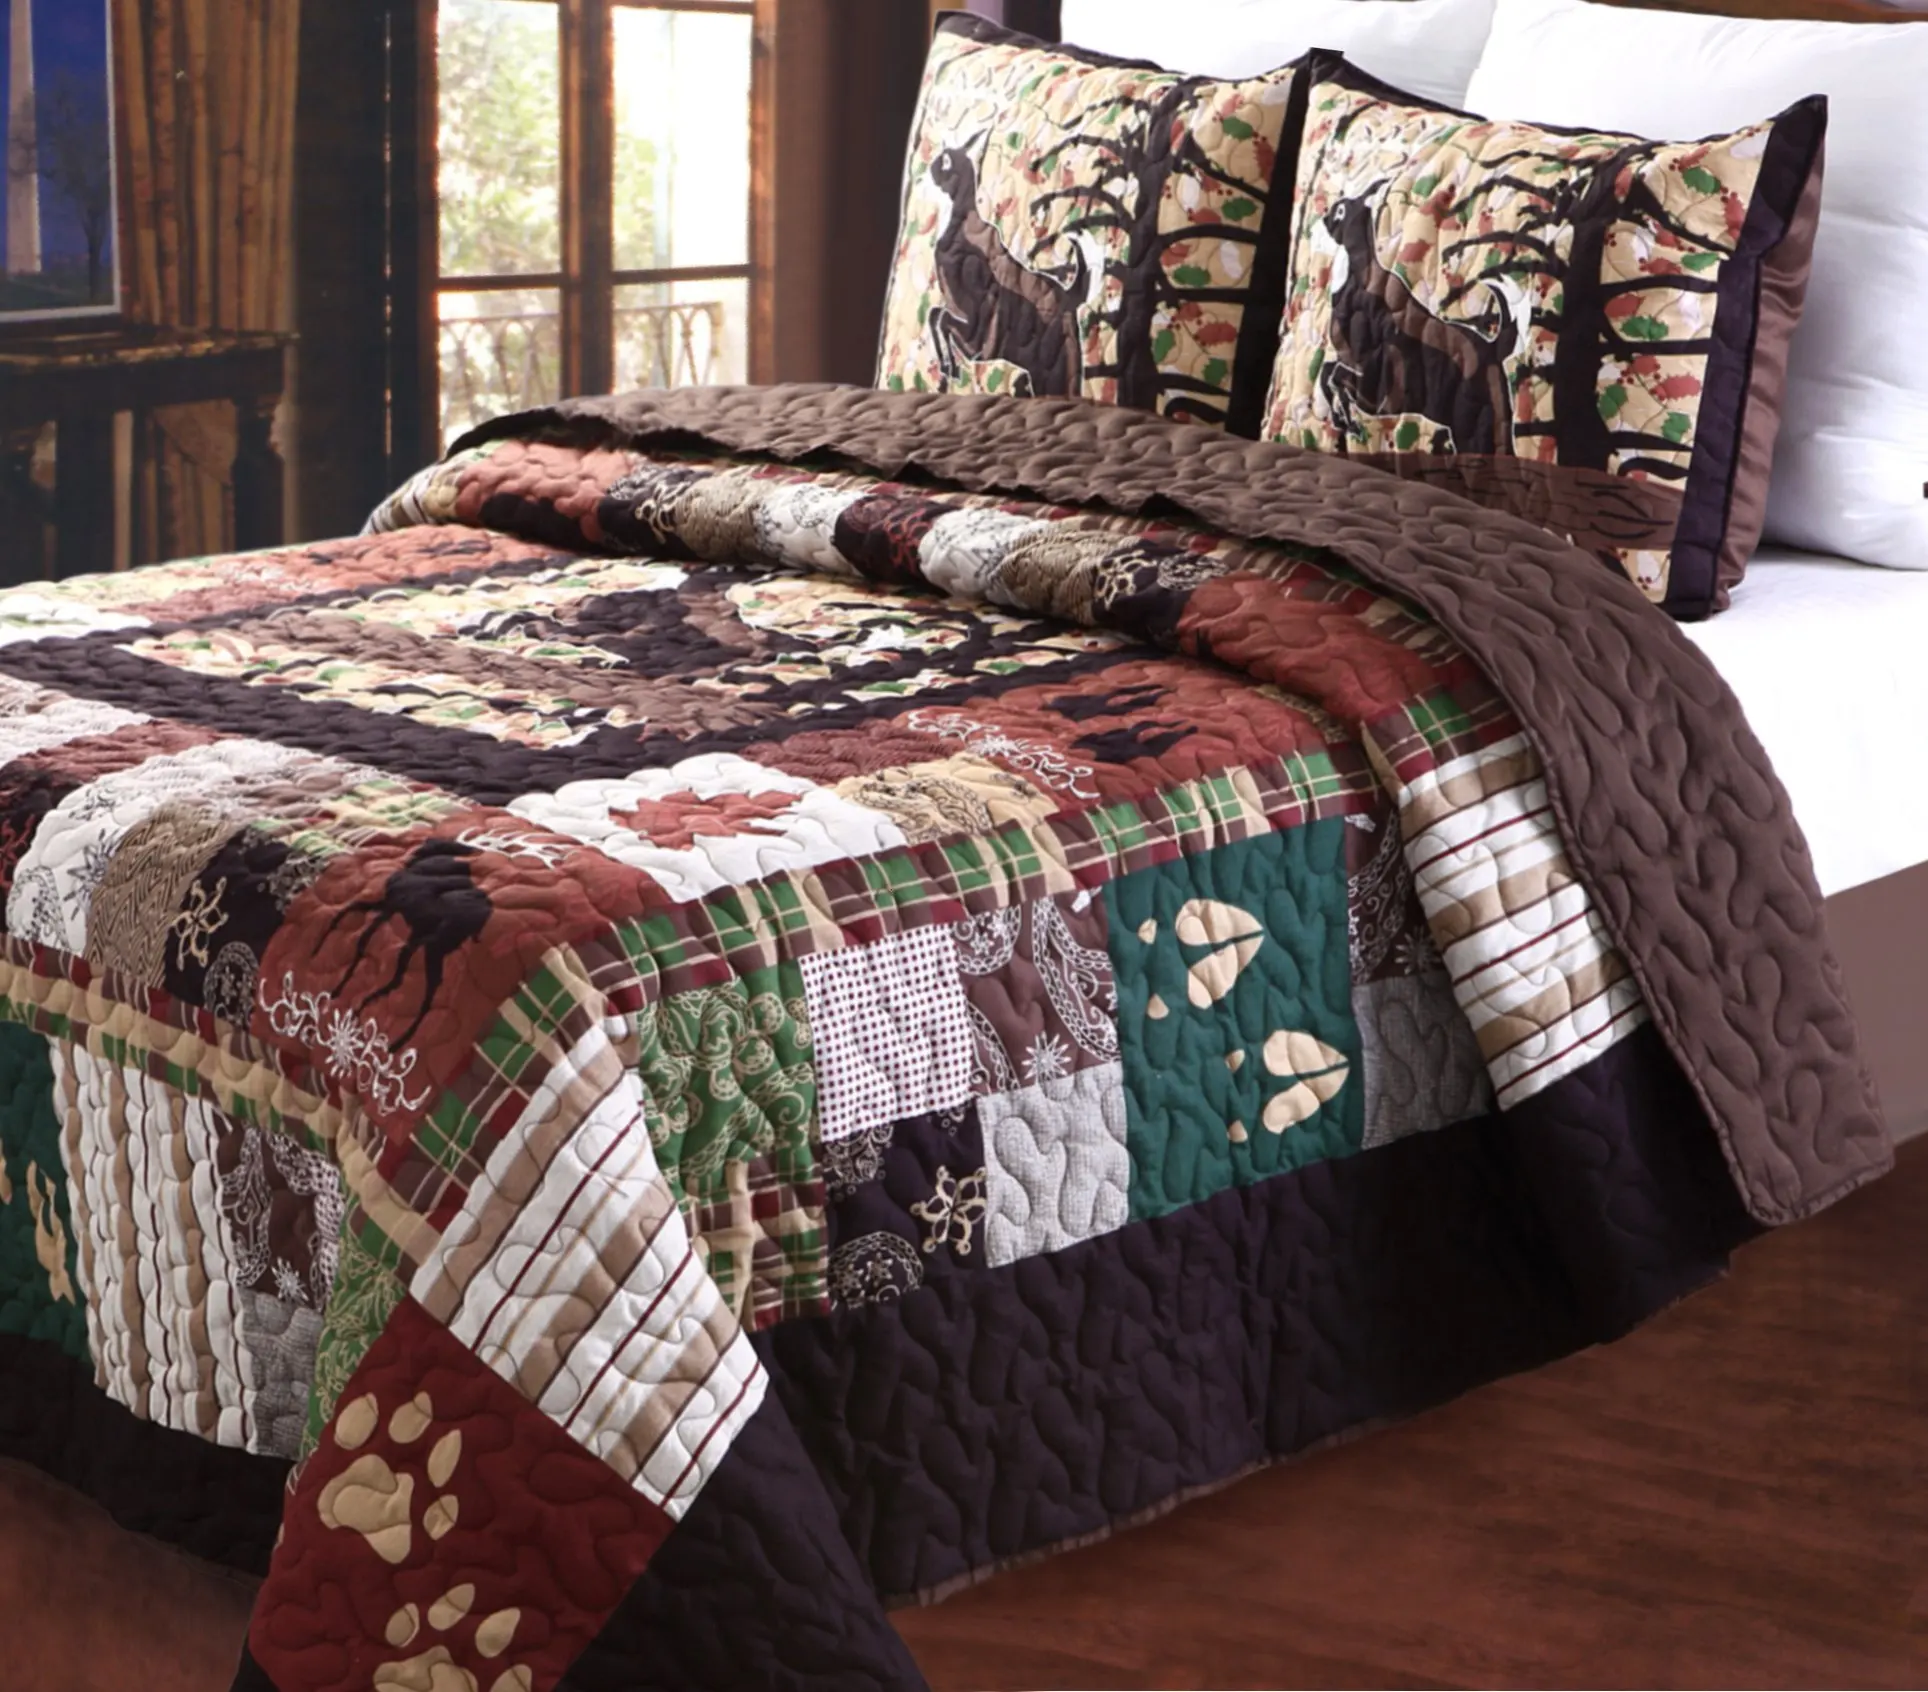 Buy 3 Piece Whitetail Deer Quilt Full Queen Set Mountain Lodge Themed